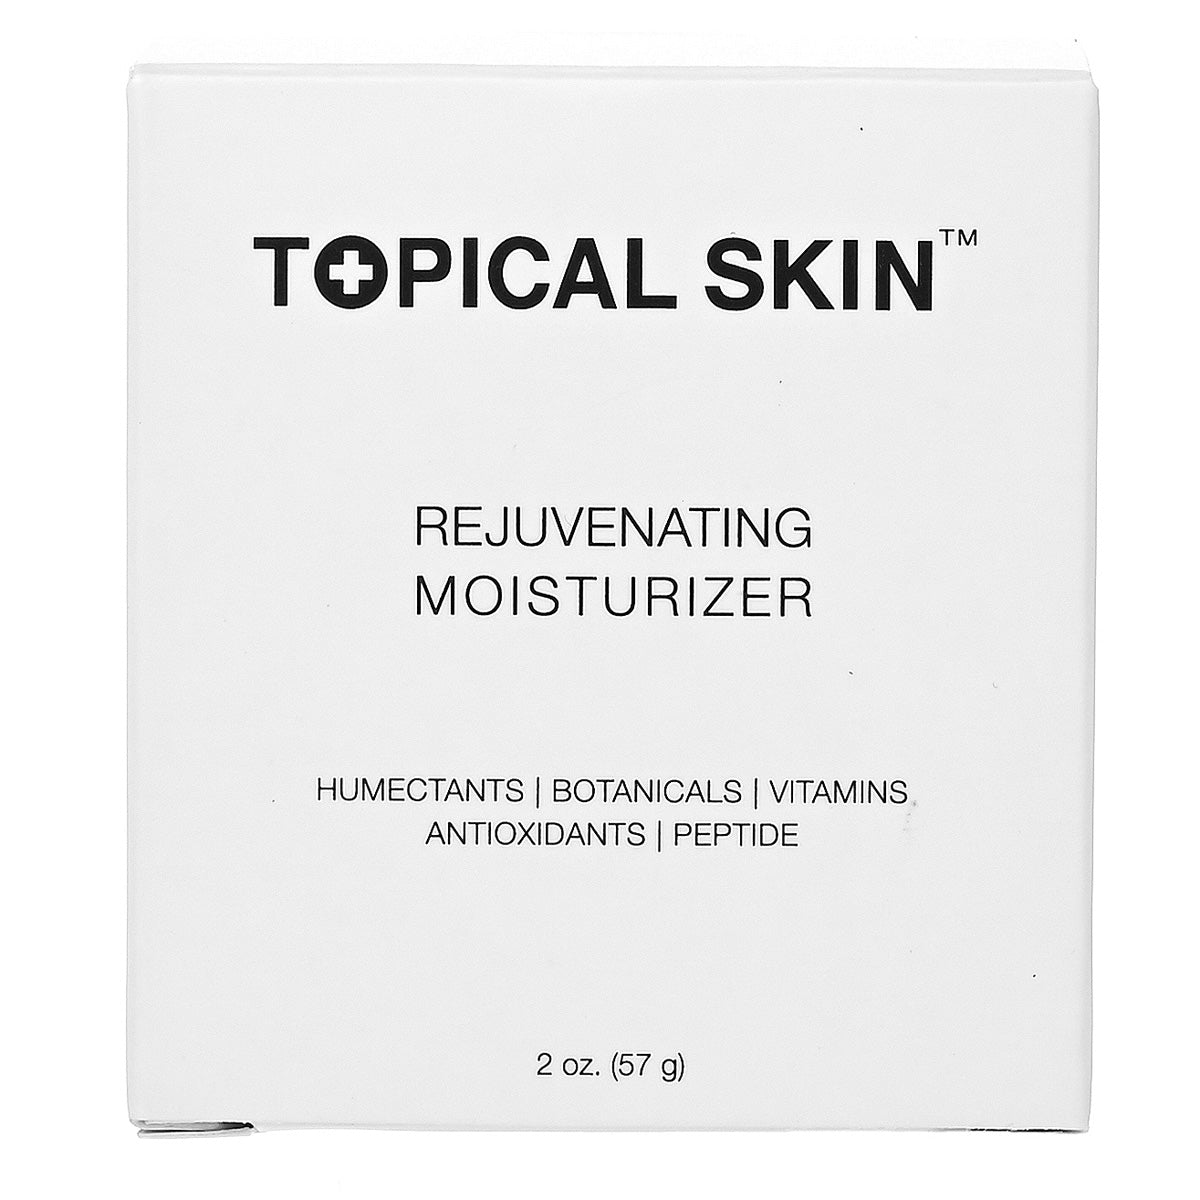 Topical Skin Rejuvenating Moisturizer with Niacinamide, Vitamins and Peptide